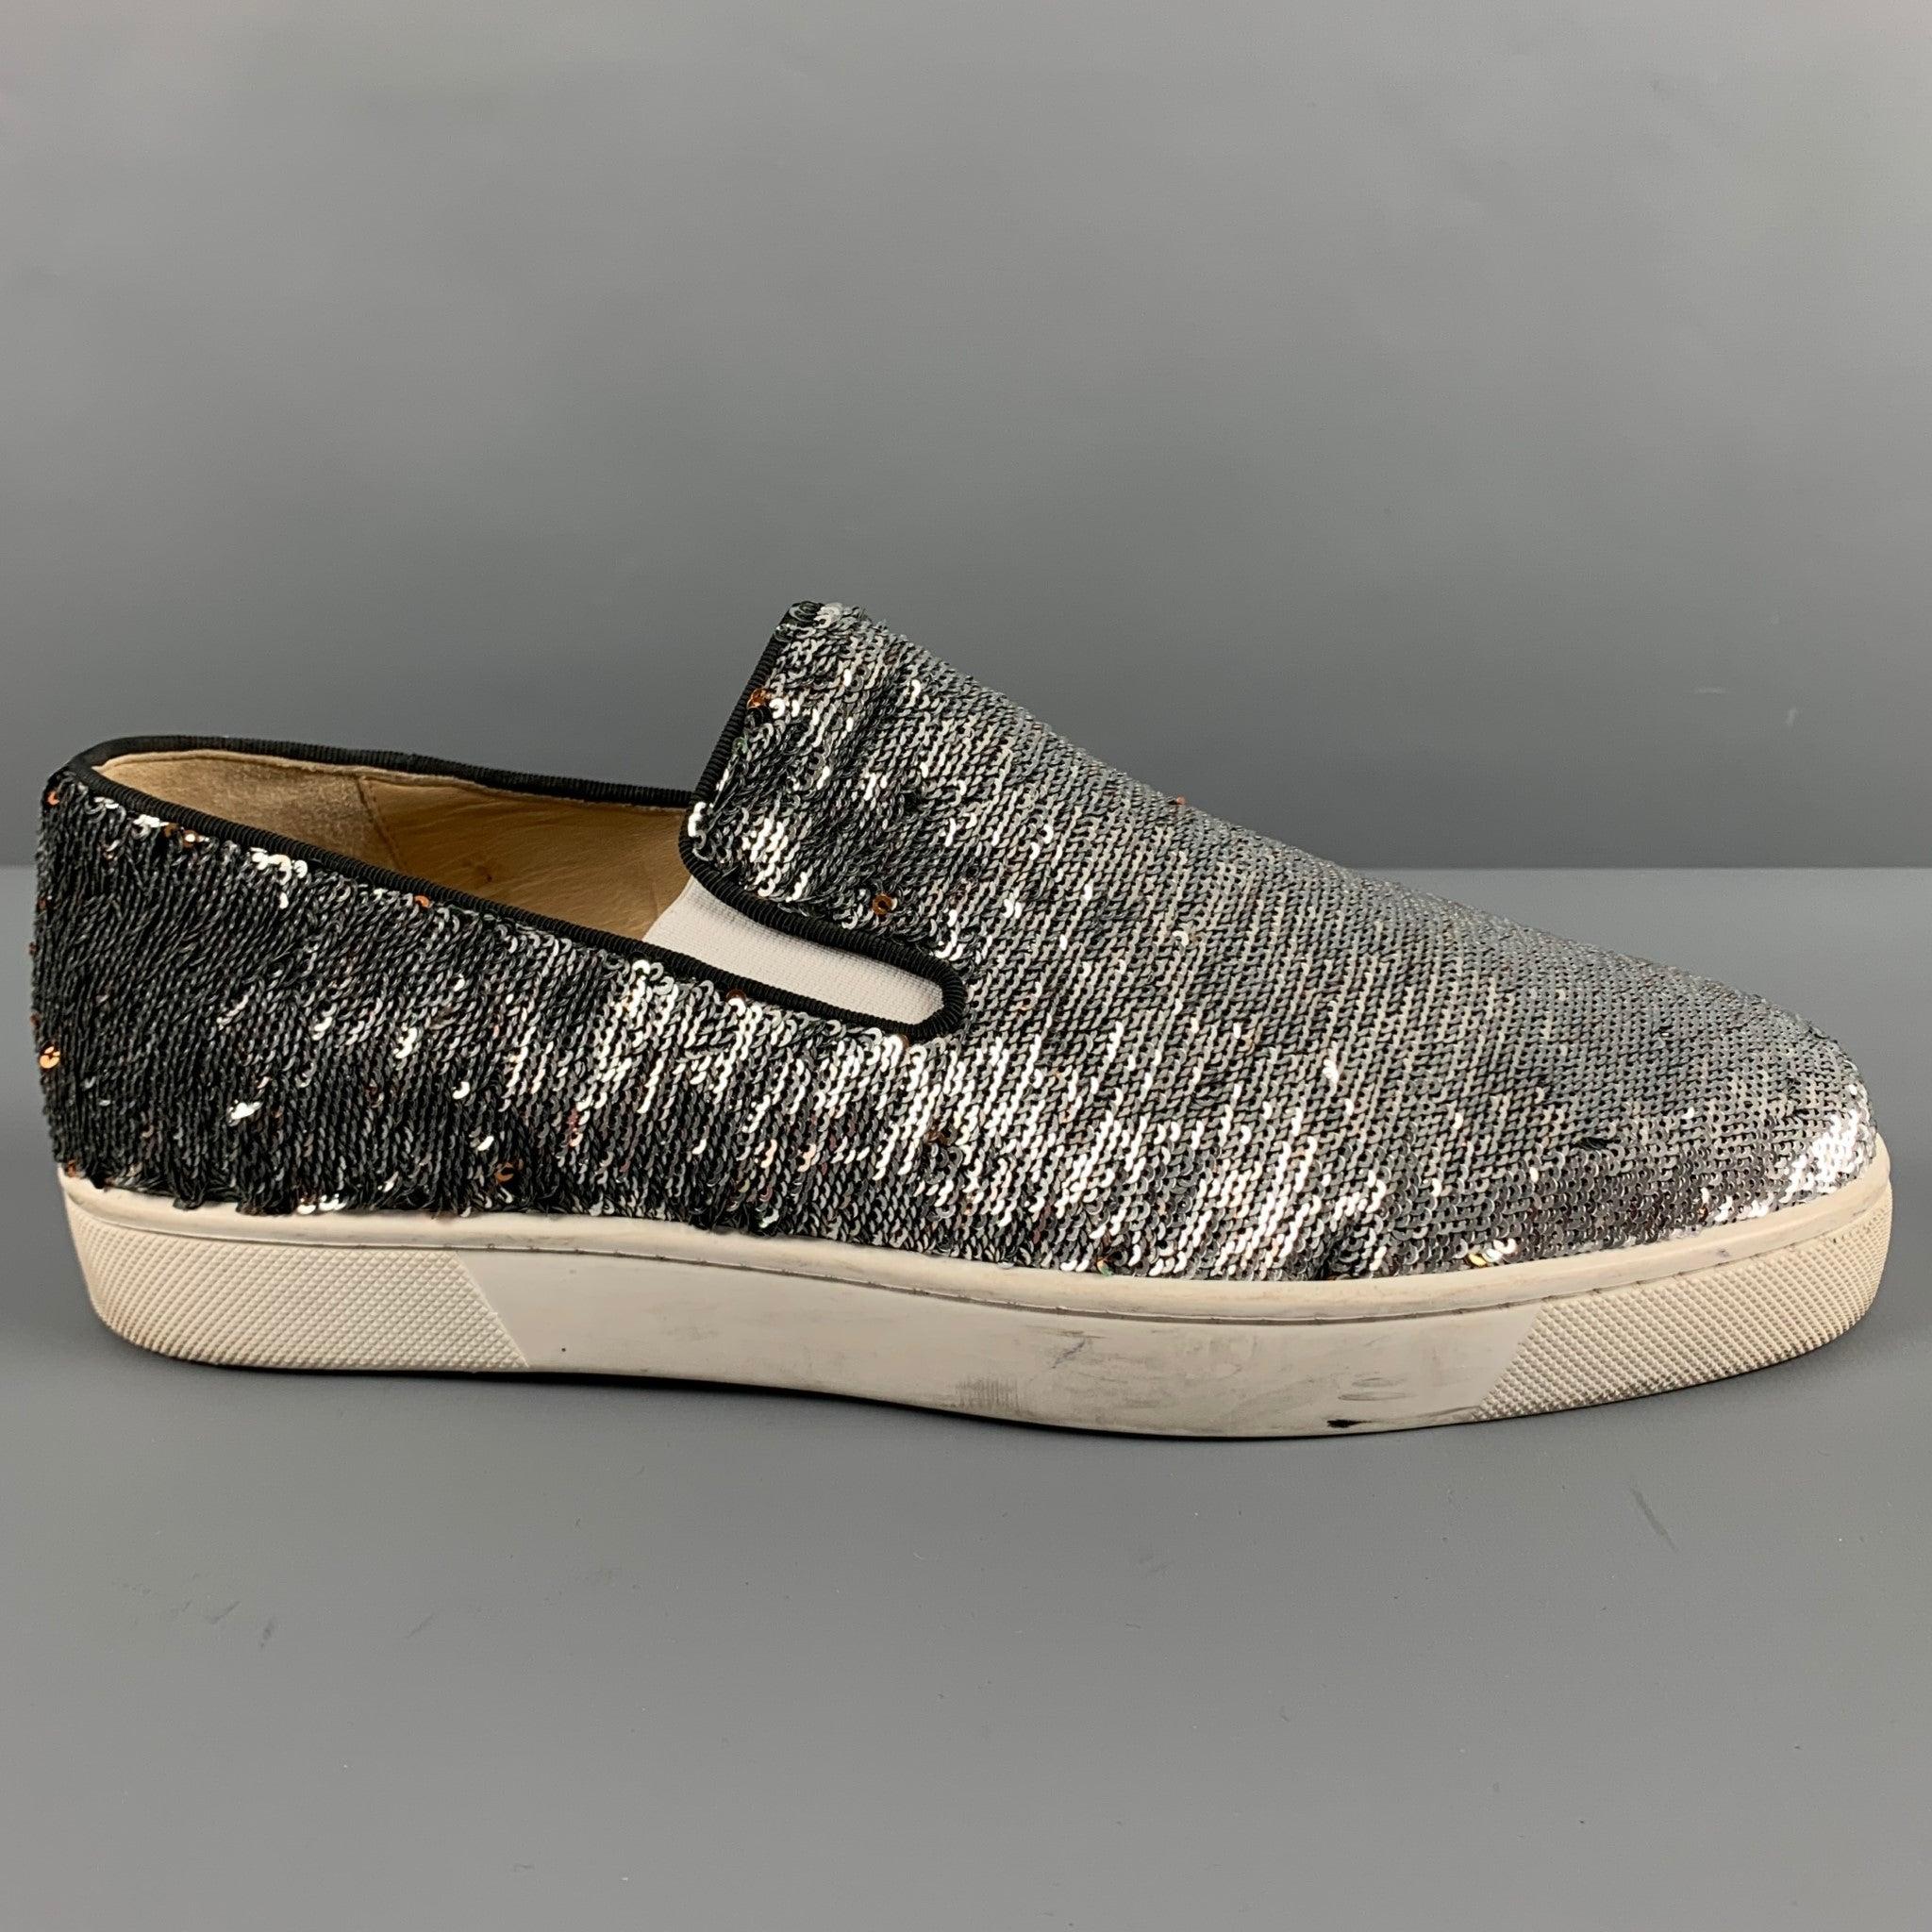 CHRISTIAN LOUBOUTIN Size 9 Silver Sequined Slip On Sneakers In Excellent Condition For Sale In San Francisco, CA